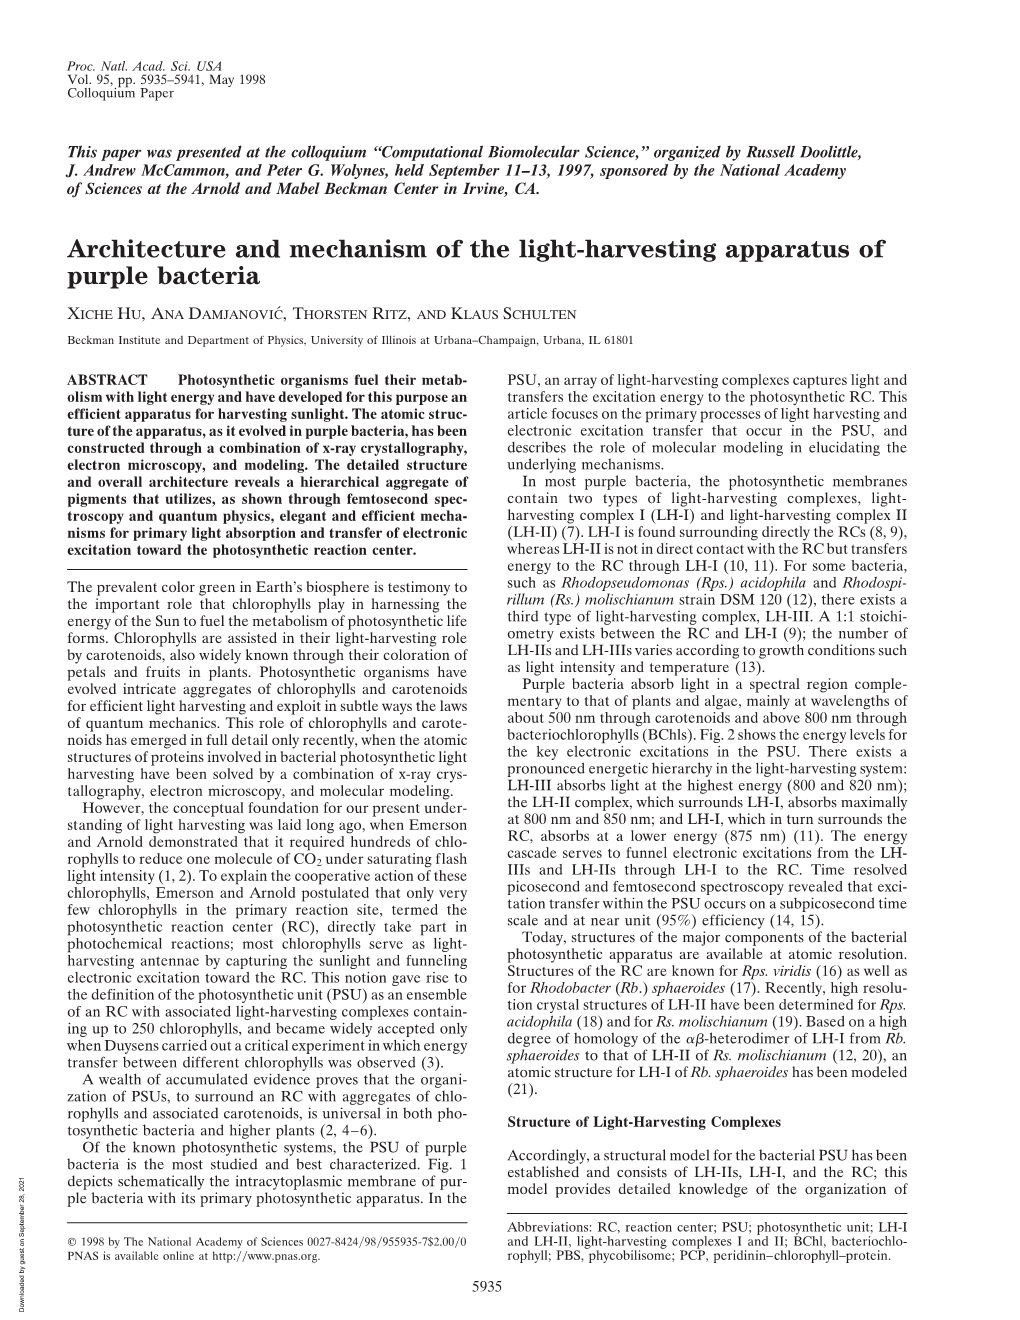 Architecture and Mechanism of the Light-Harvesting Apparatus of Purple Bacteria